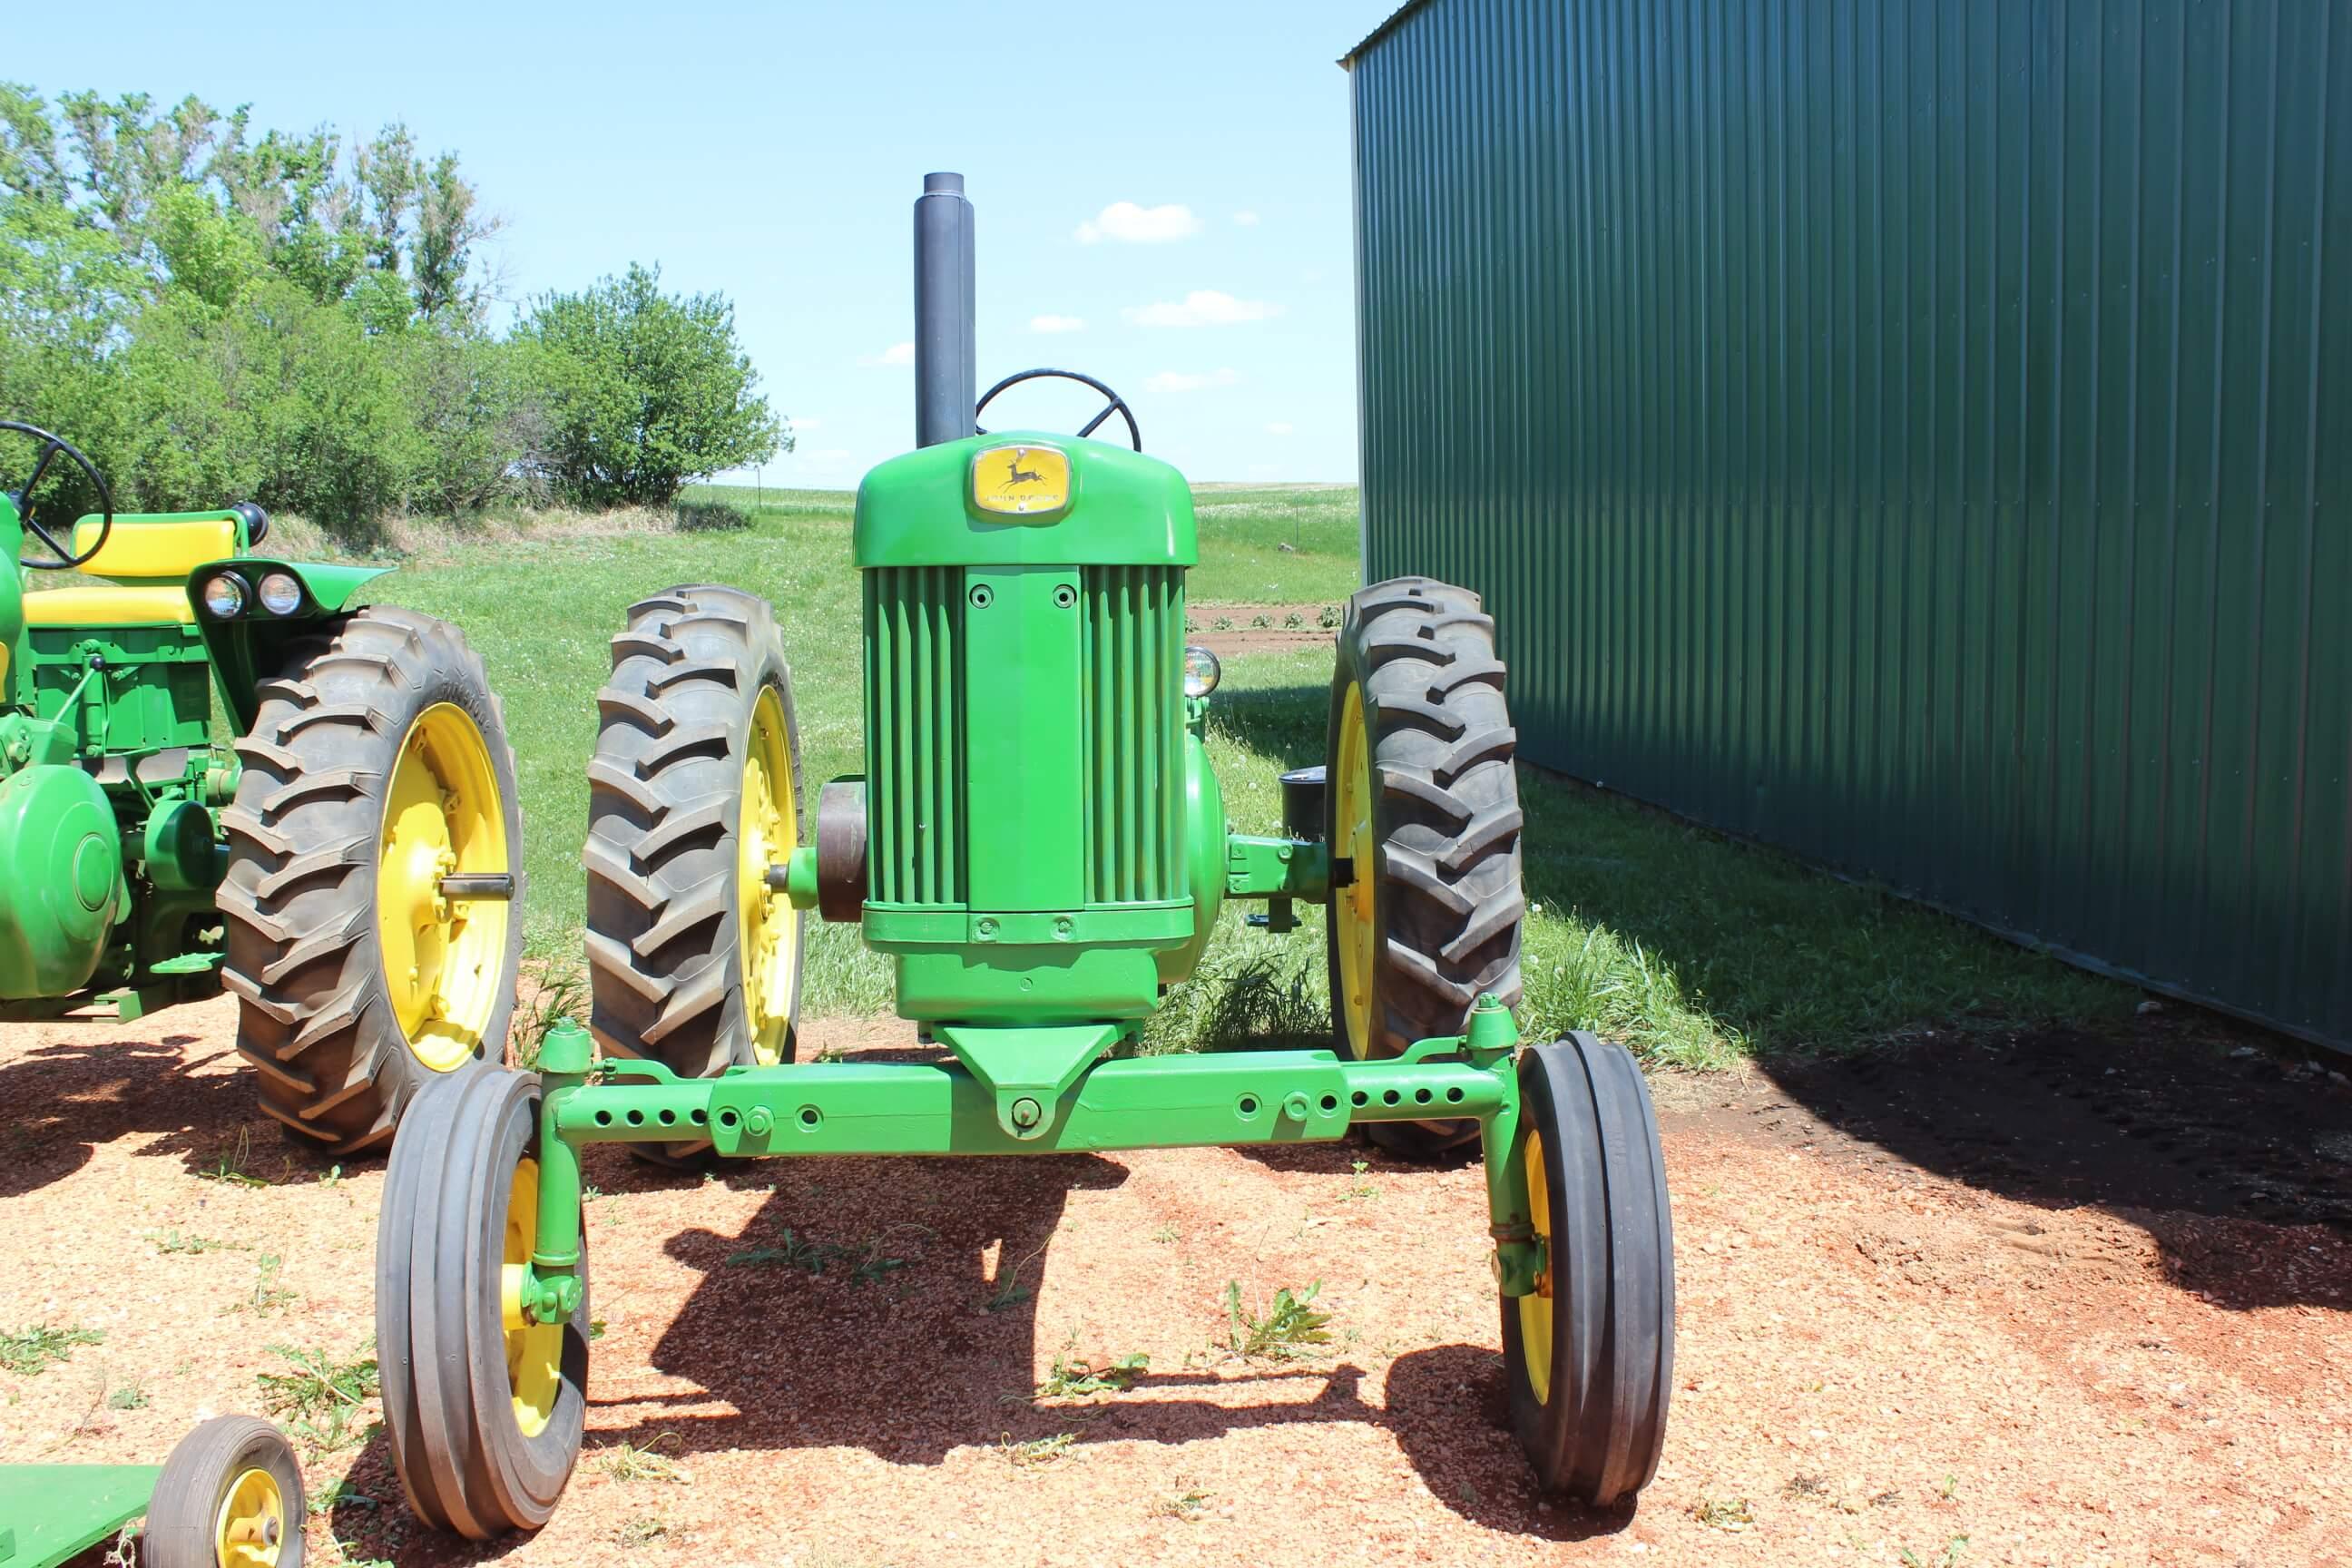 JD 630 Tractor